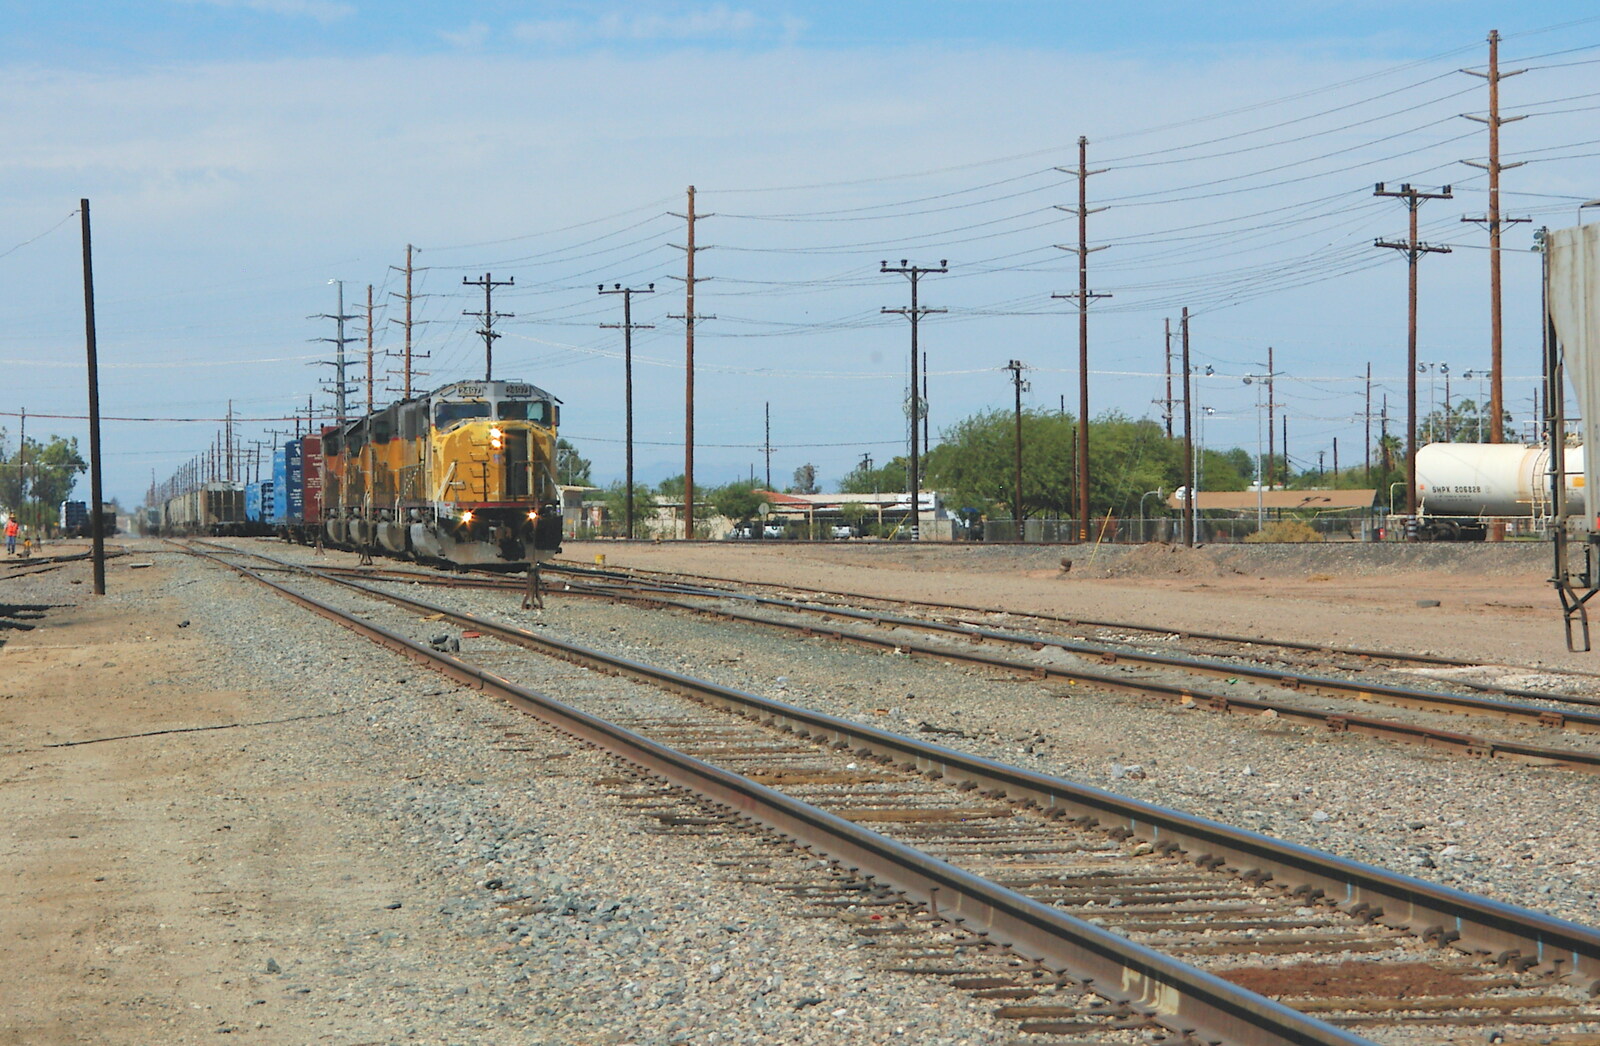 The railway yard from California Desert: El Centro, Imperial Valley, California, US - 24th September 2005